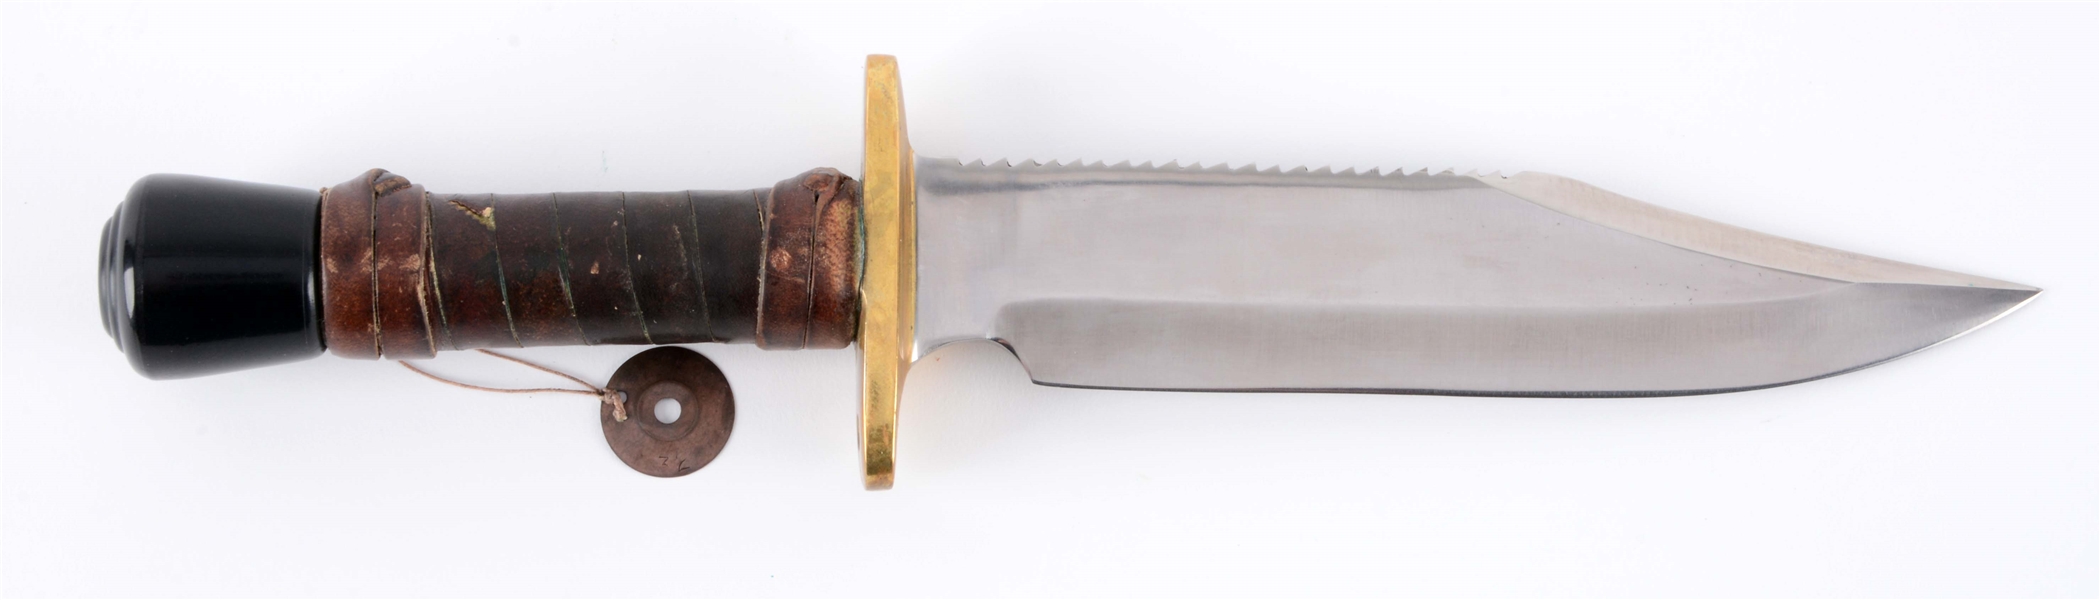 J.N. COOPER SURVIVAL KNIFE WITH HOLLOW HANDLE.